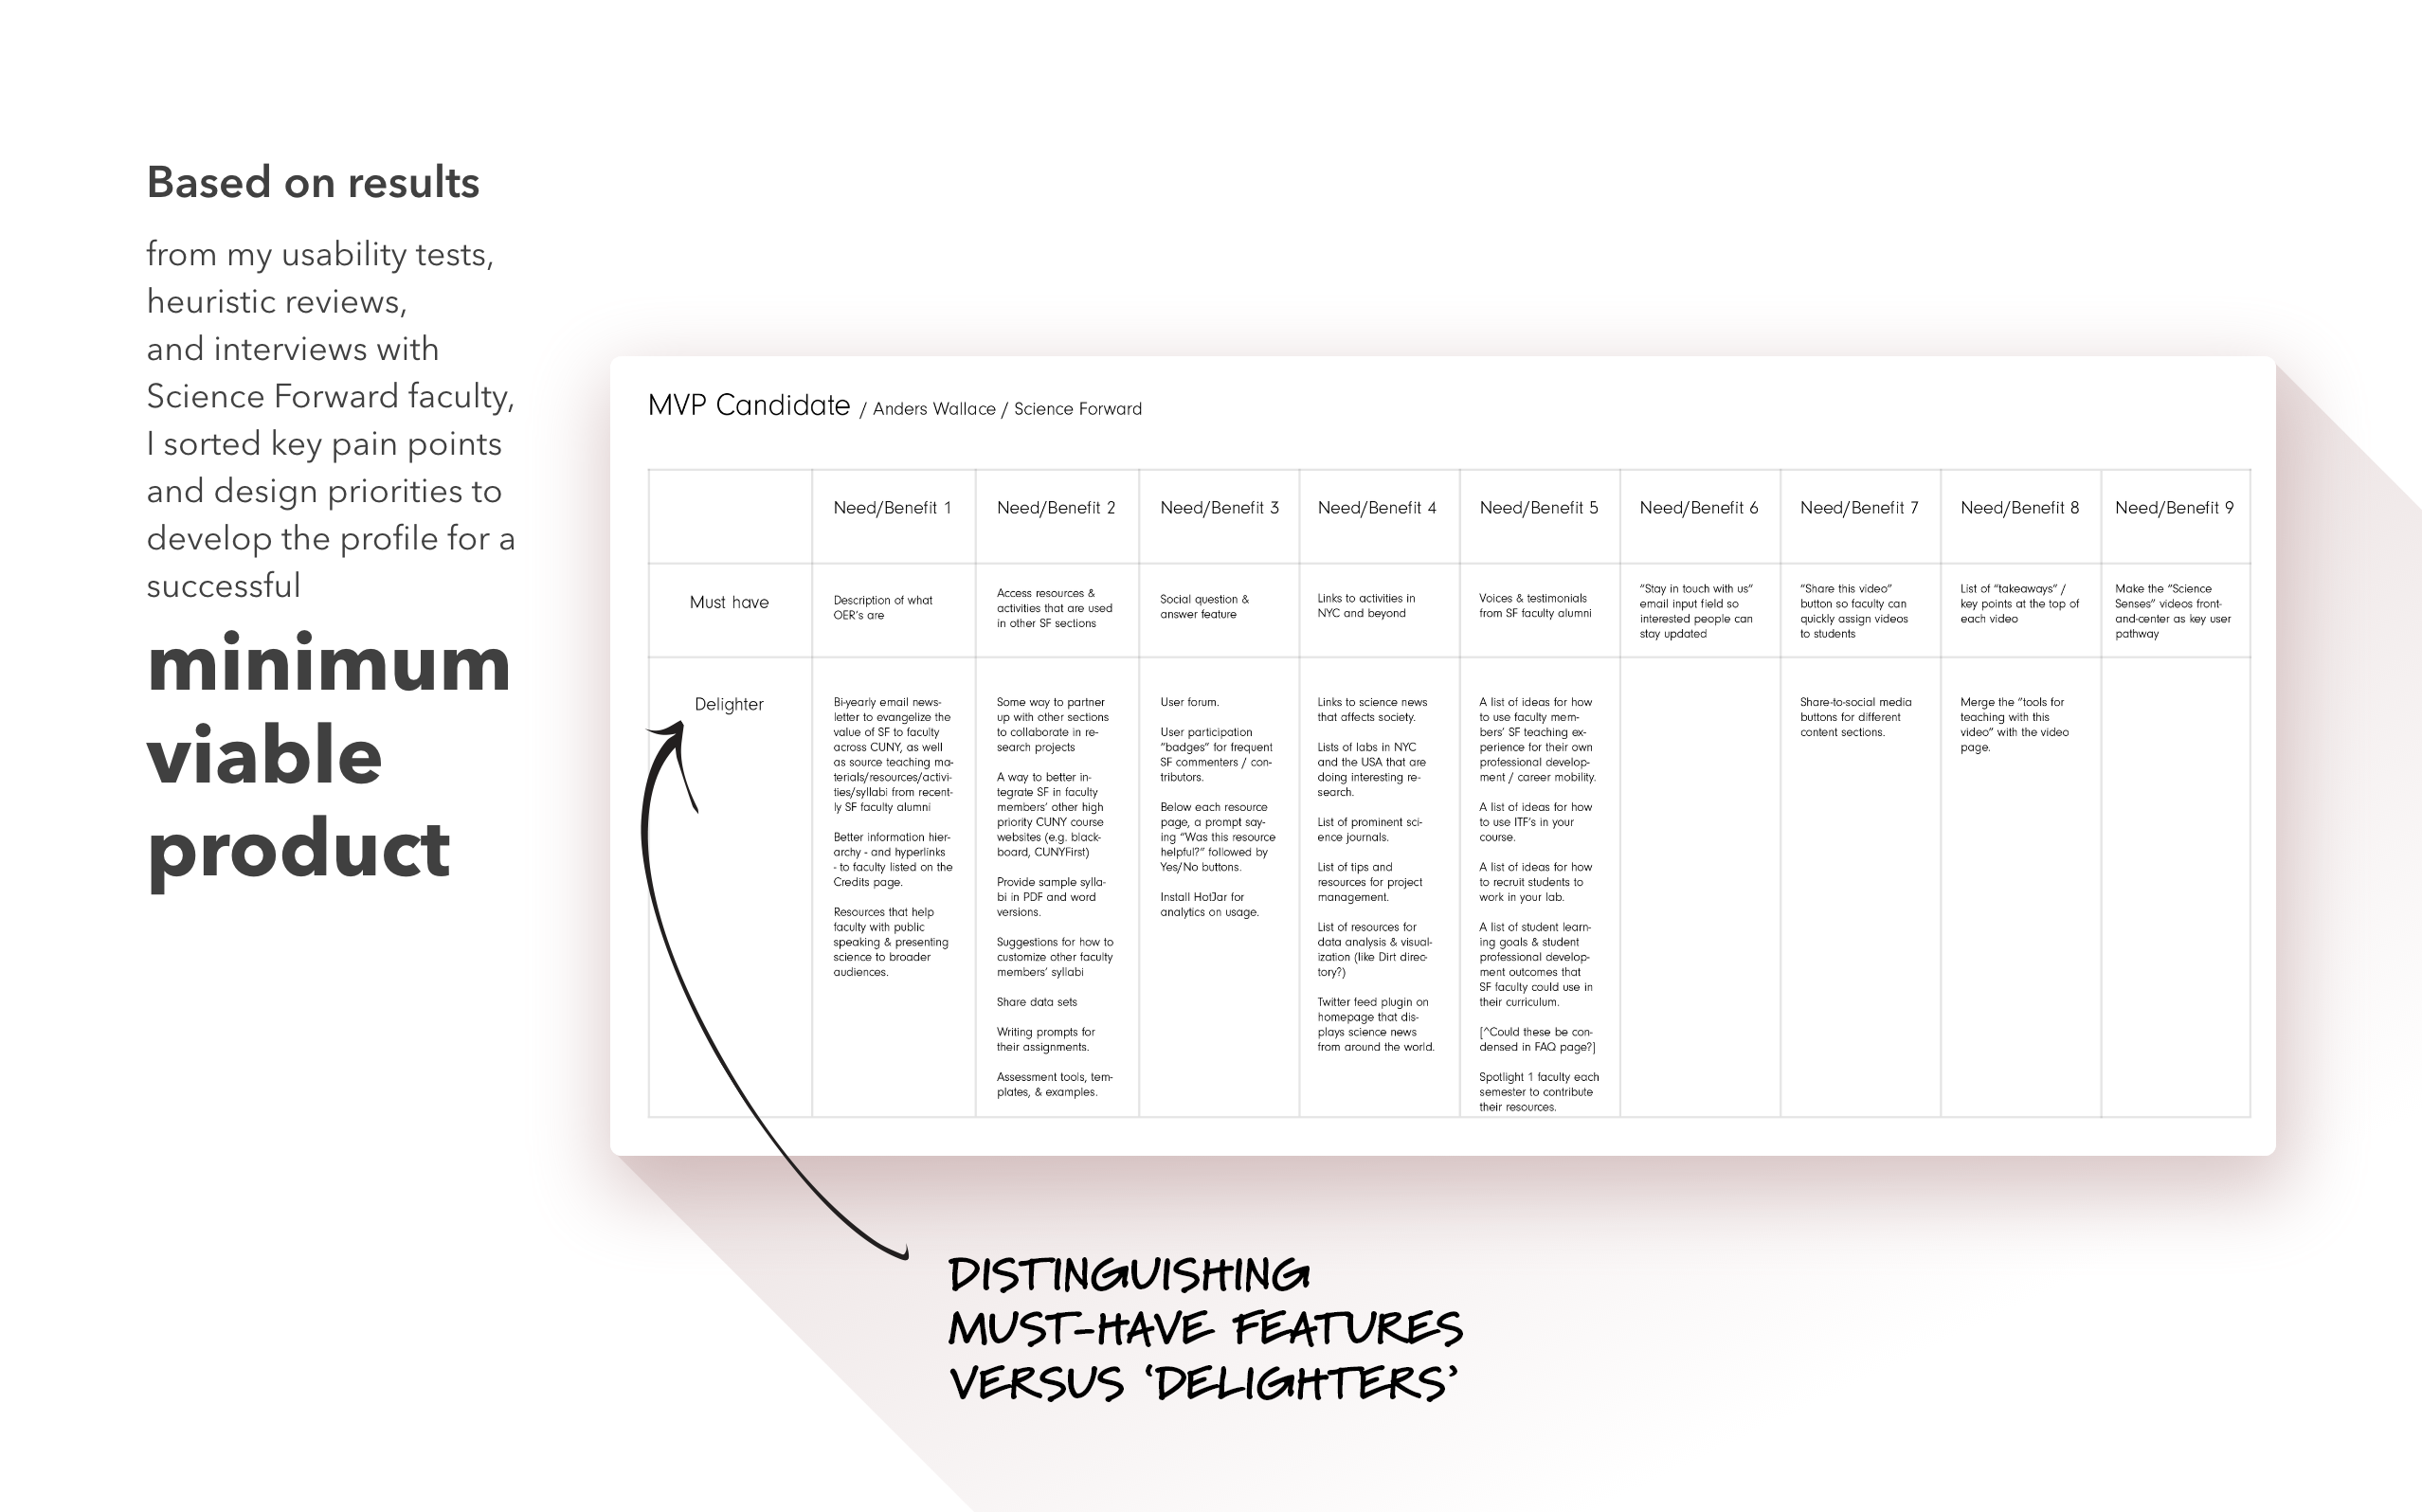 defining the mvp minimum viable product, by separating must-have features from delighters